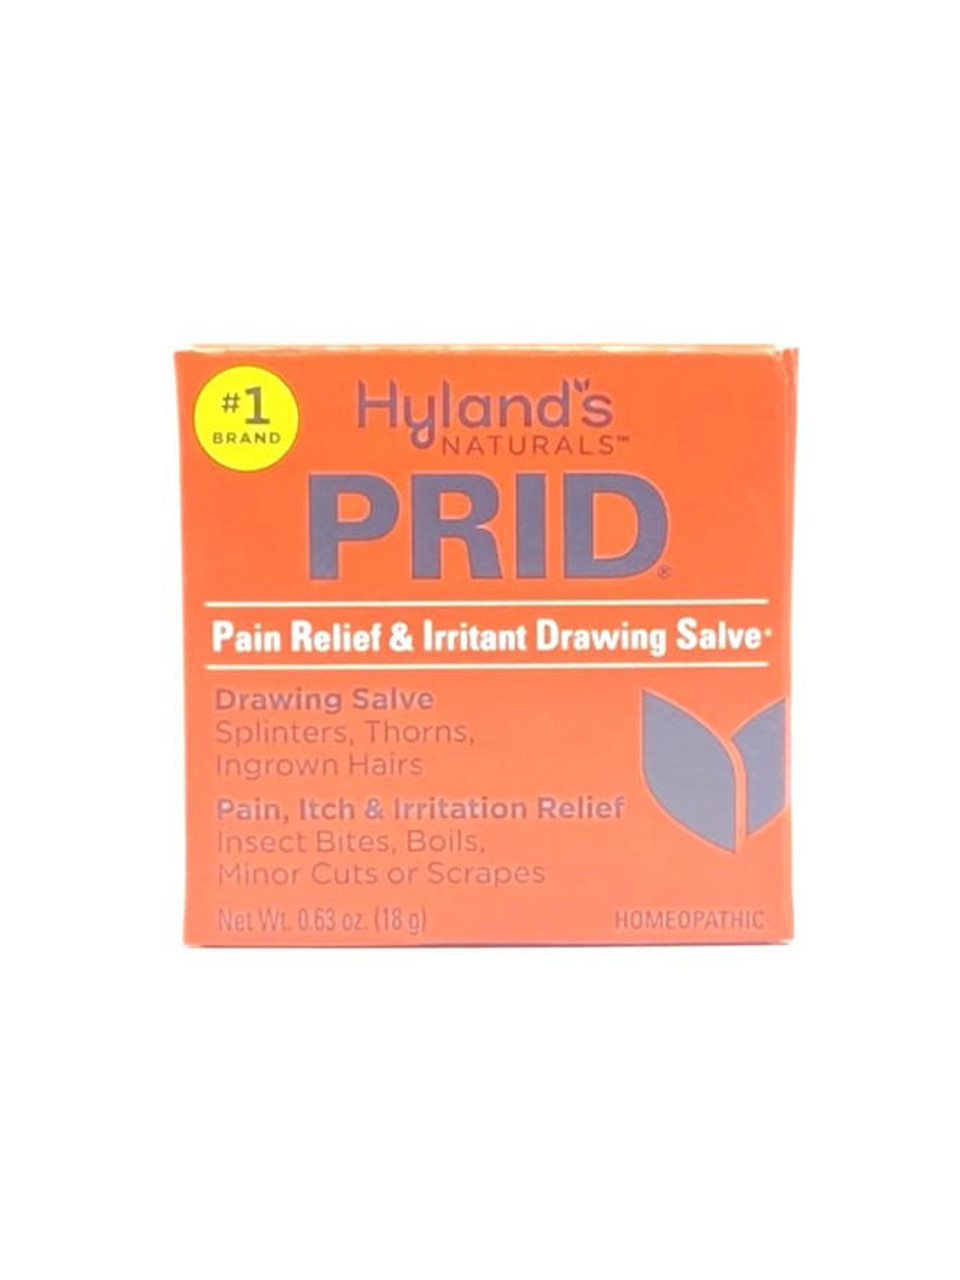 PRID Drawing Salve, 18g Homeopathic - Ullman's Health and Beauty